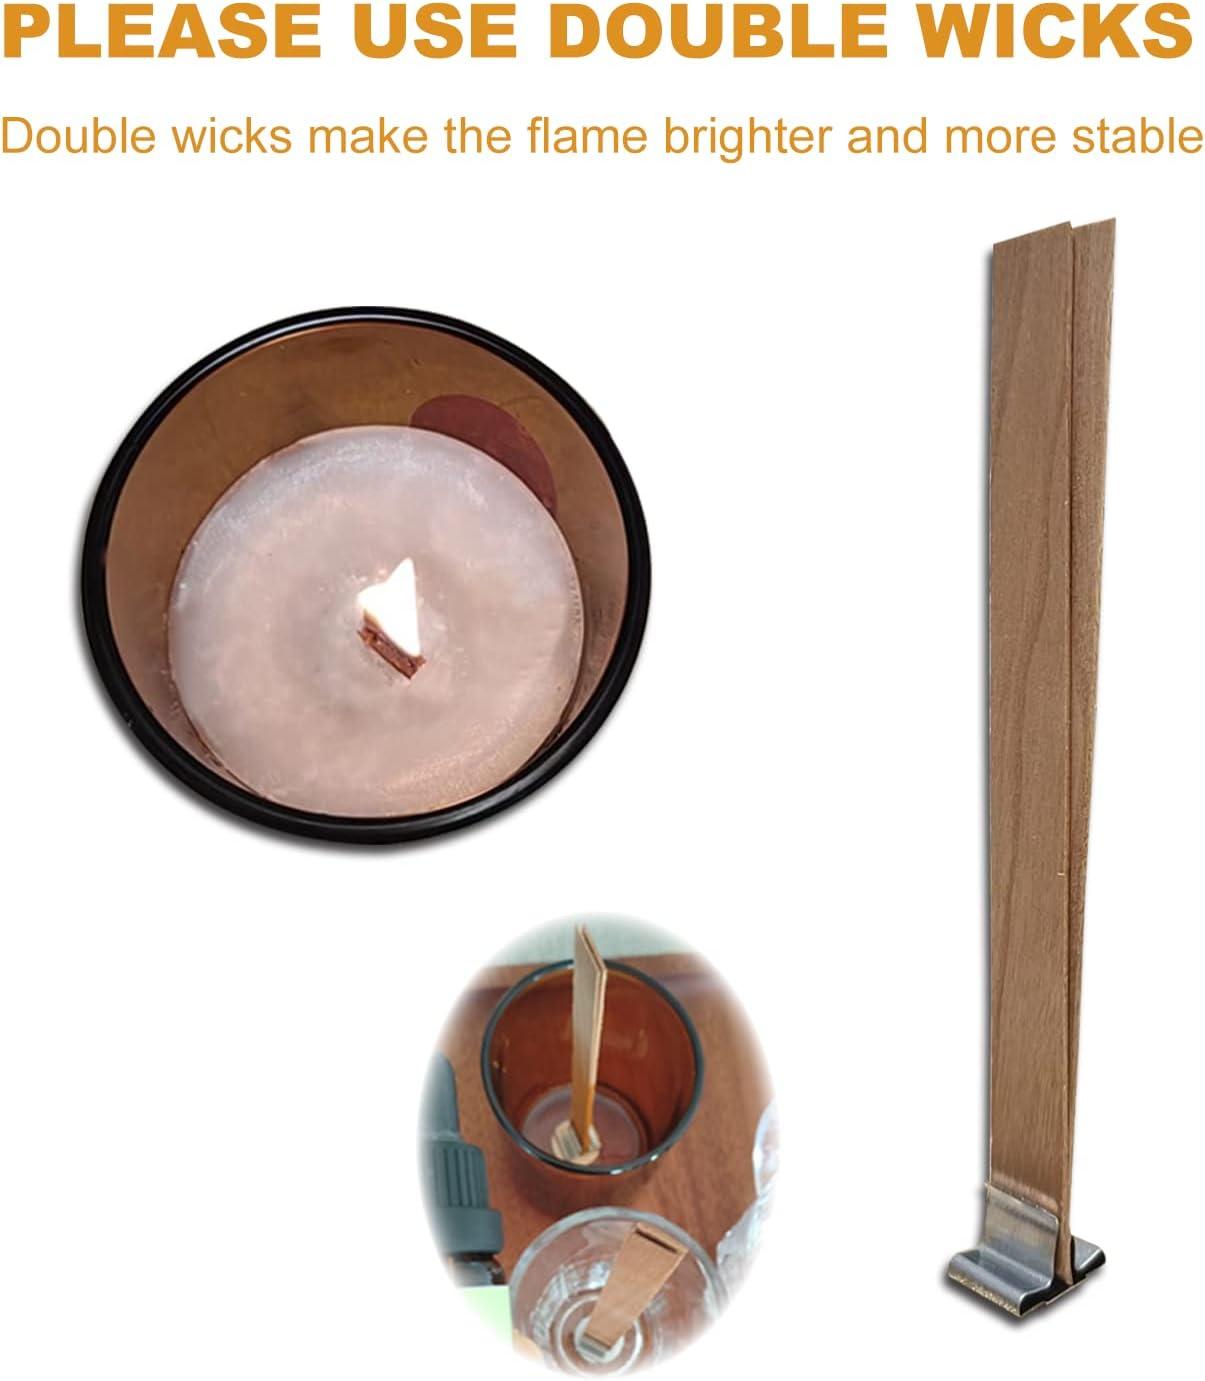 Making Candles Wooden Wicks  Making Candles Wood Wicks - Diy Home